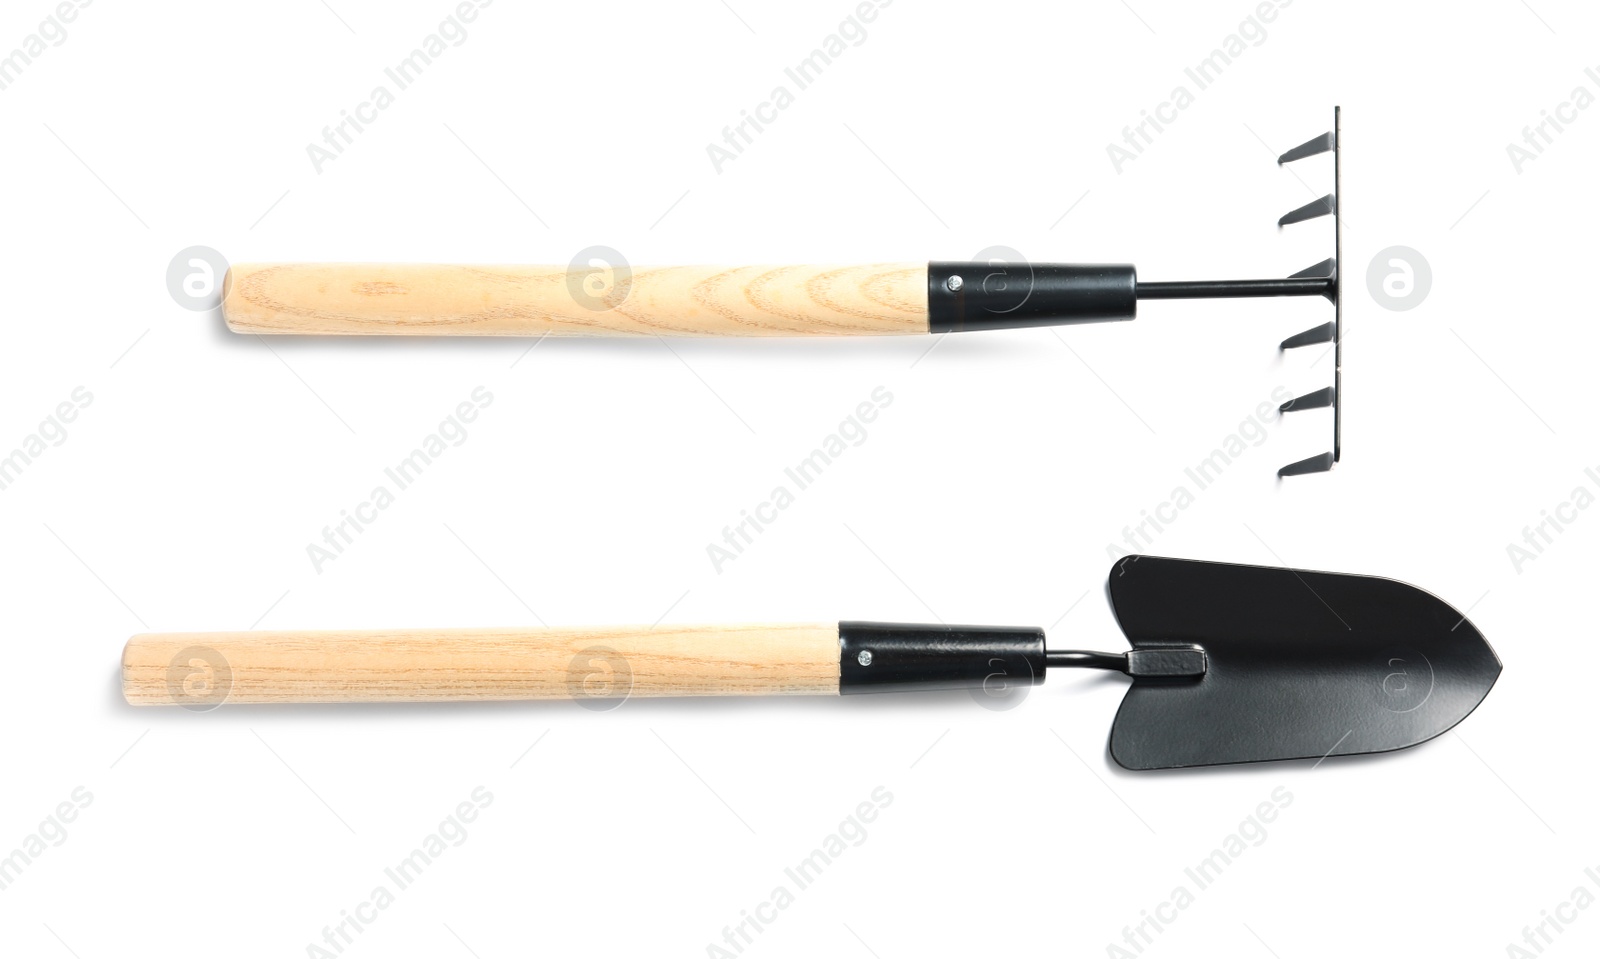 Photo of New rake and trowel on white background. Professional gardening tools